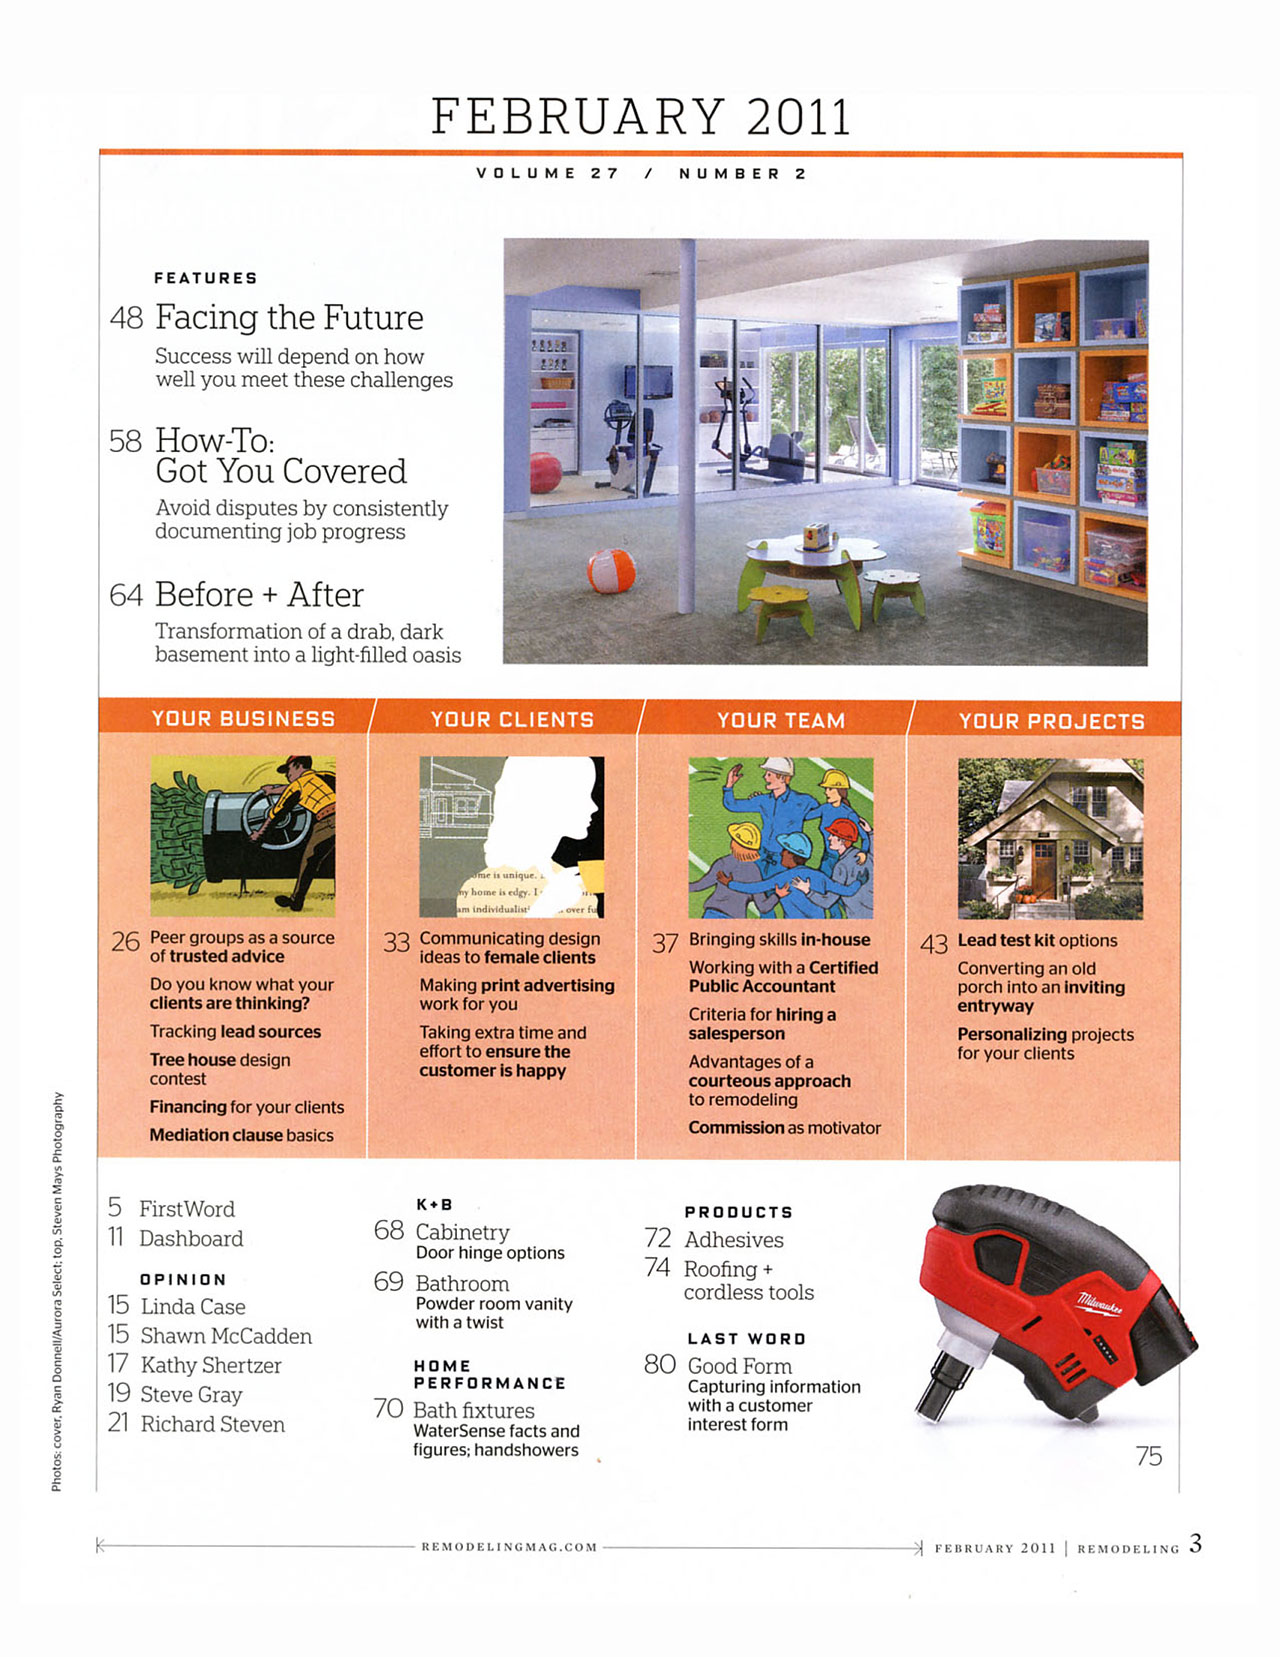 04_News_Out-of-the-Darkness-RemodelingMag2011-01_web_w1280